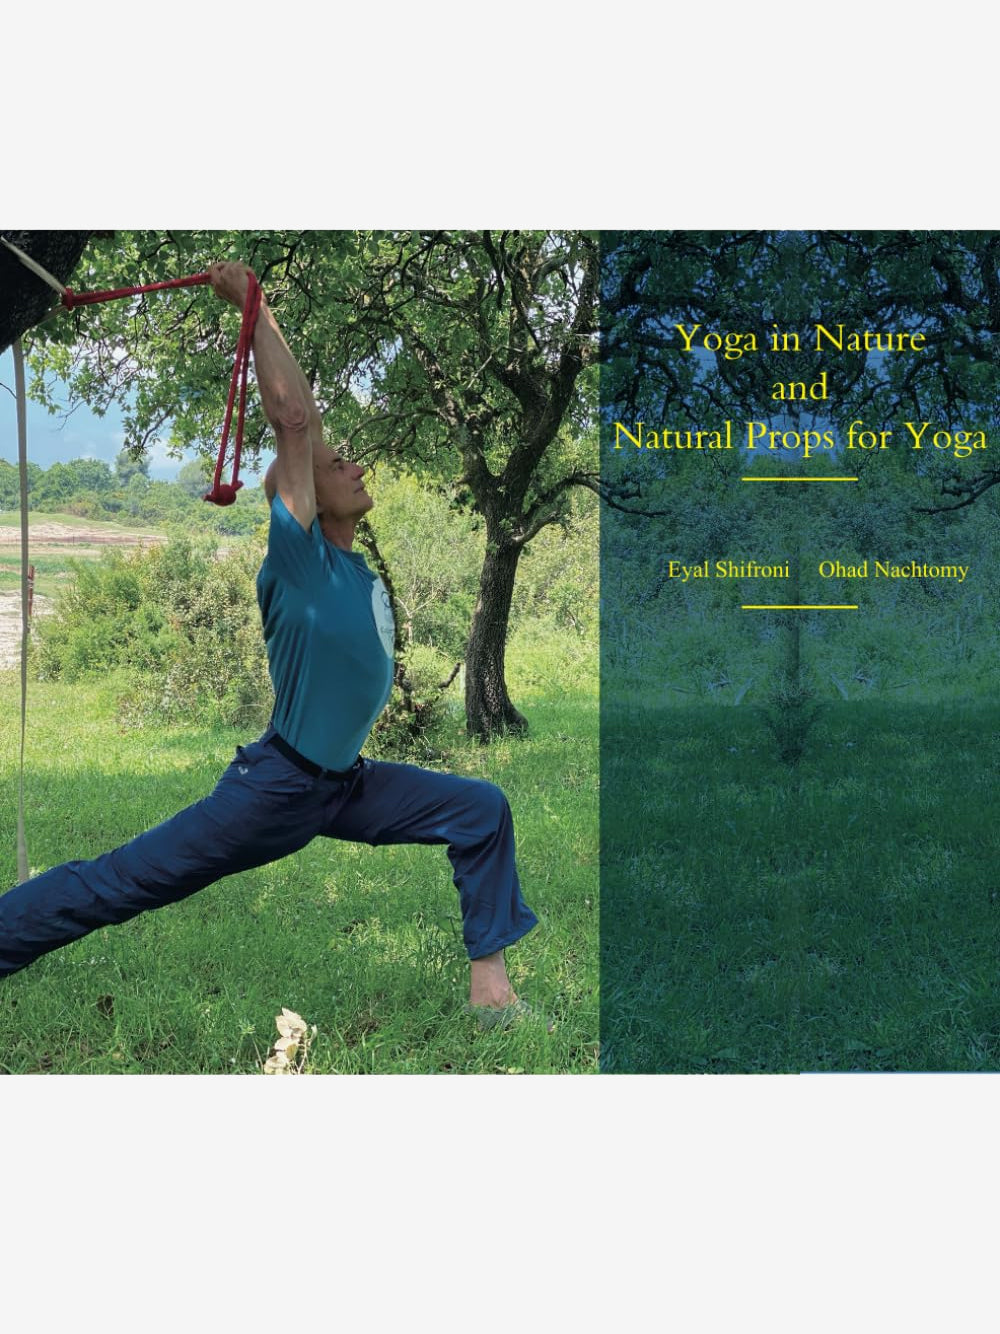 Yoga in Nature and Natural Props for Yoga